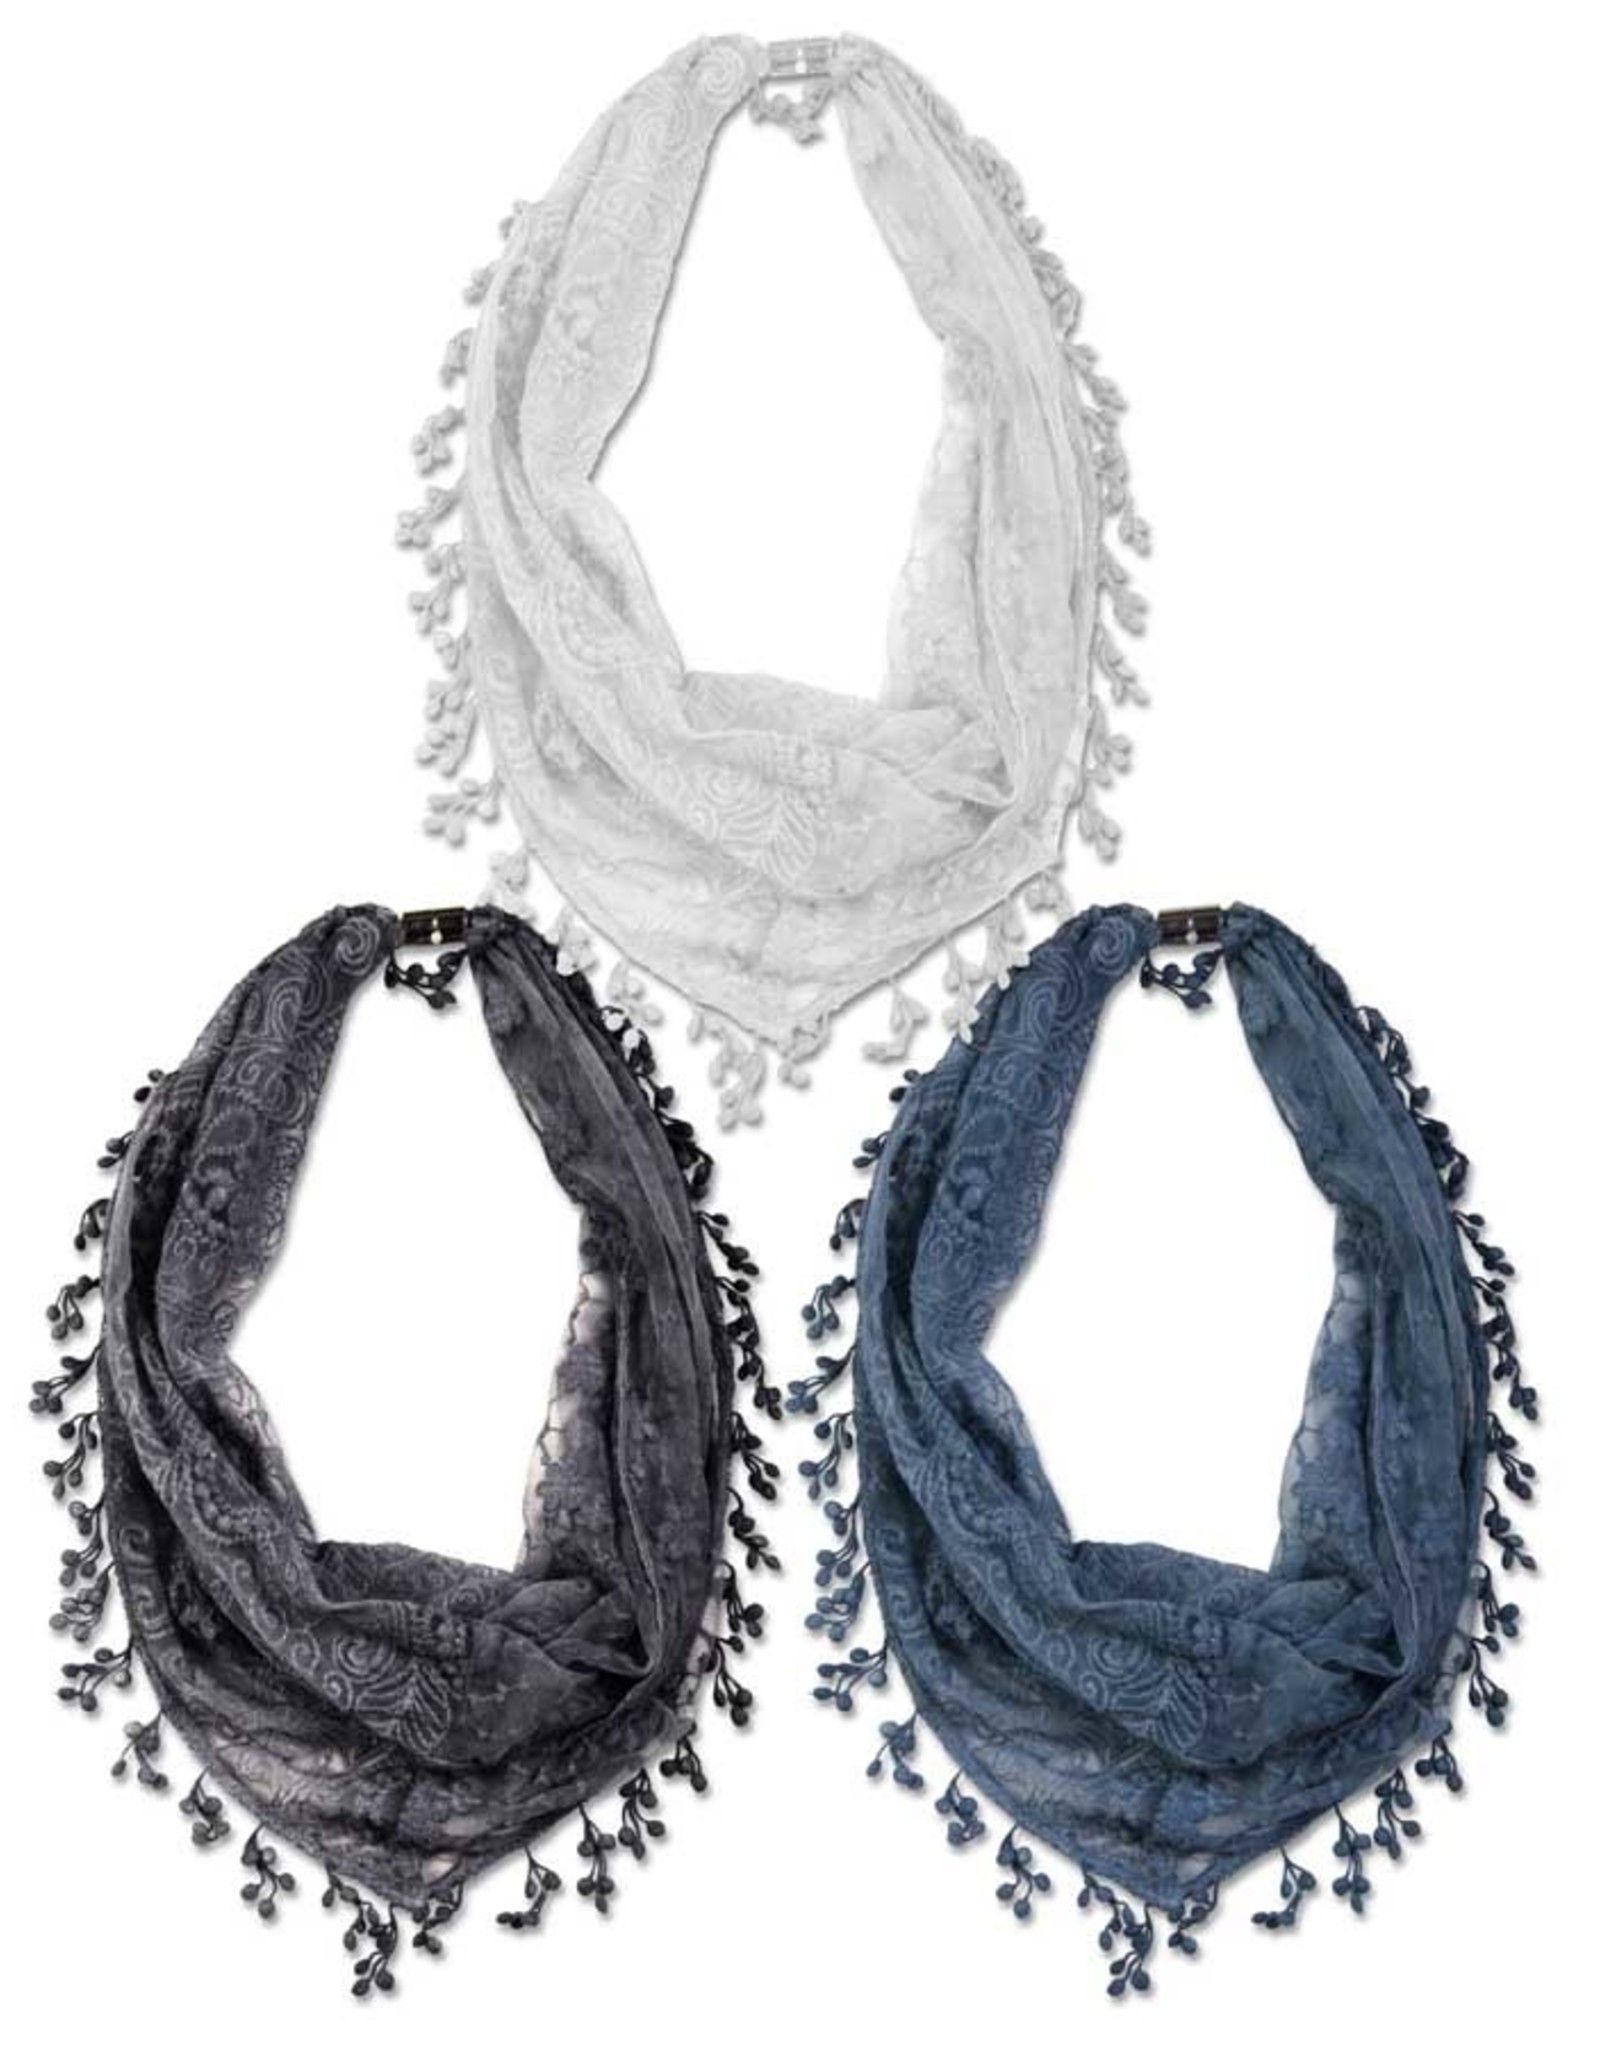 K & K Magnetic Scarf - Paisley Lace